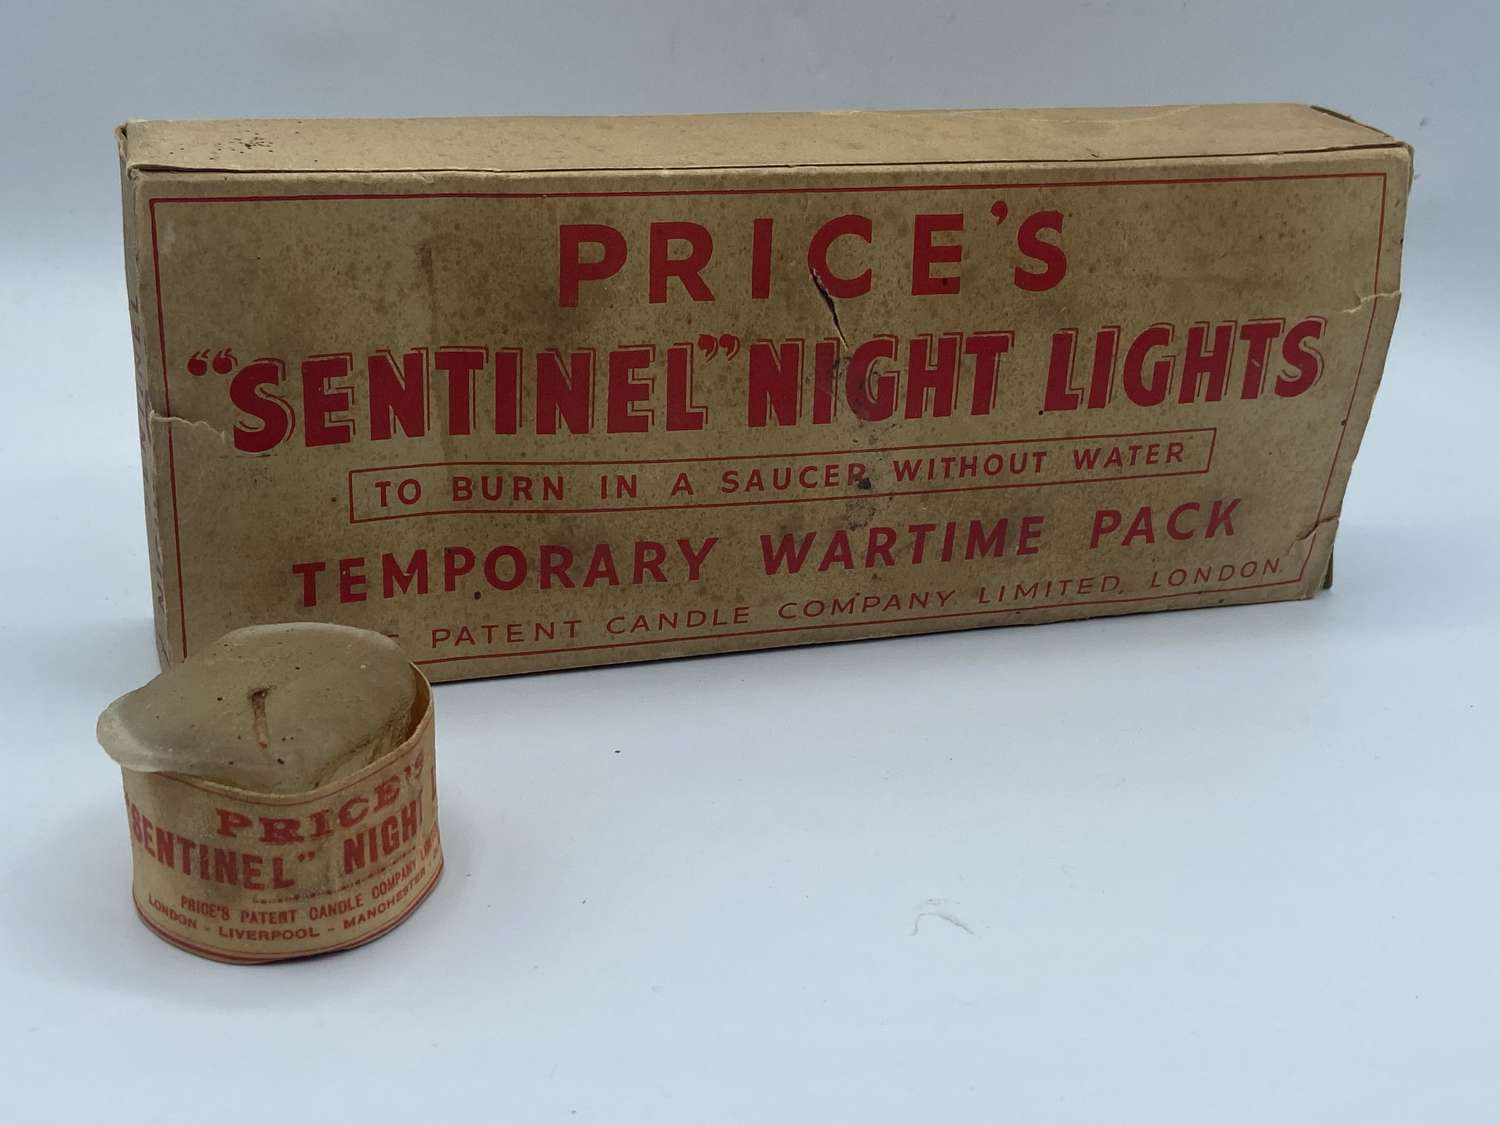 WW2 Temporary Wartime Pack Prices Sentinel Nighy Lights Complete